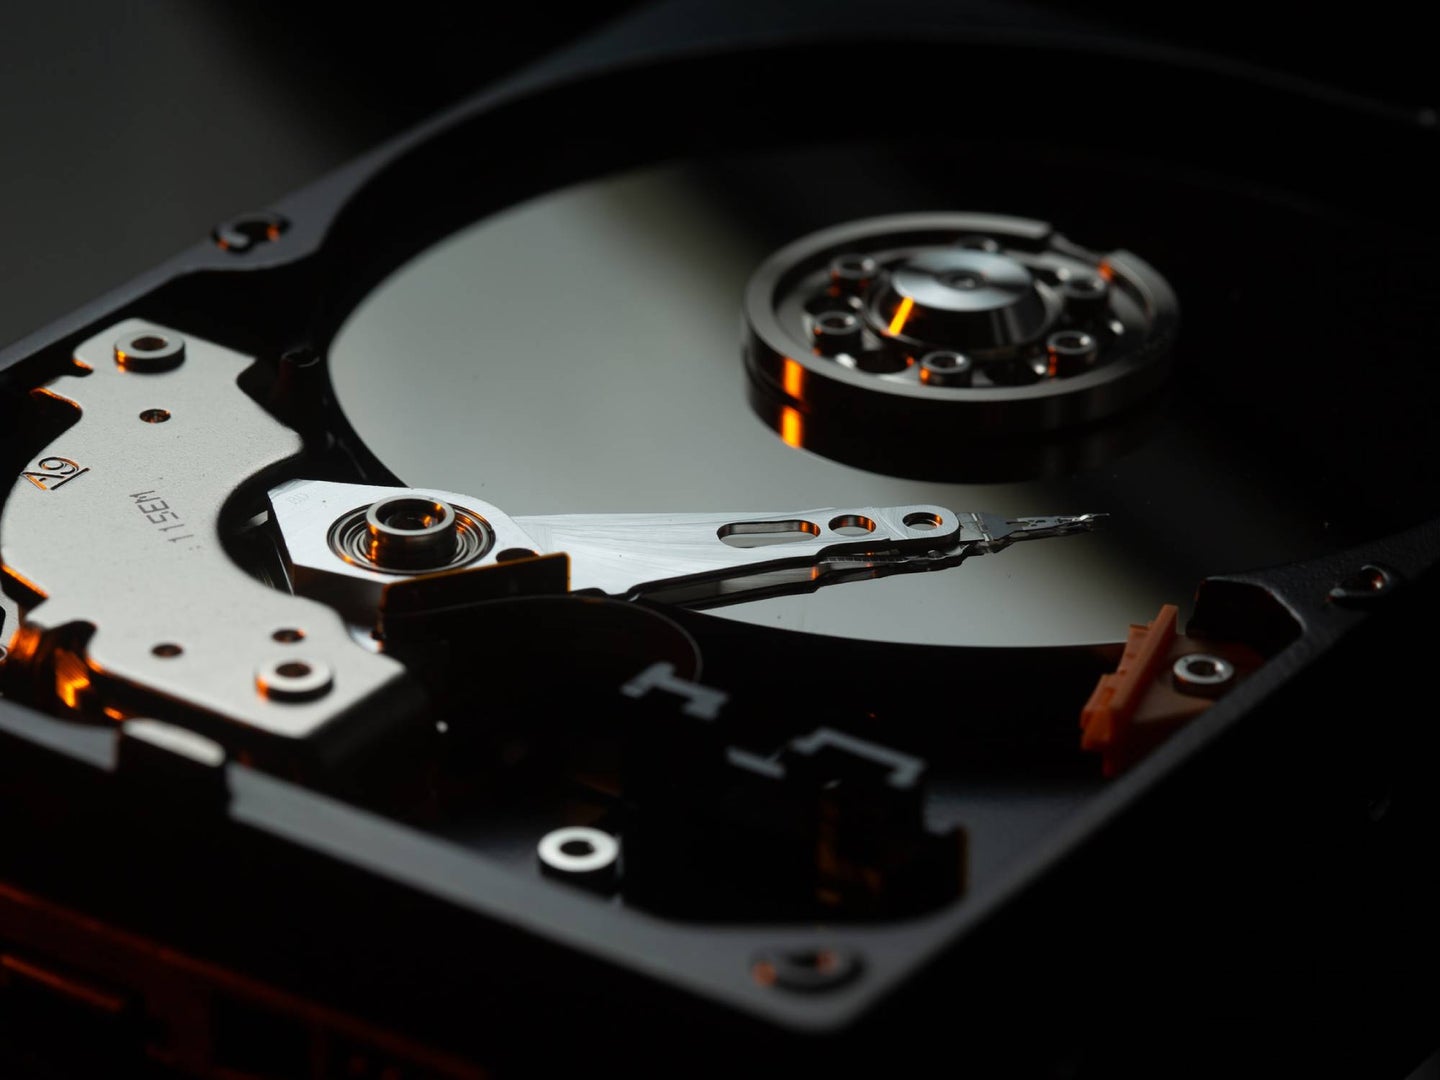 Kent uitdrukken Bederven Hard drive failure got you down? Here's how to know if it's safe to use.